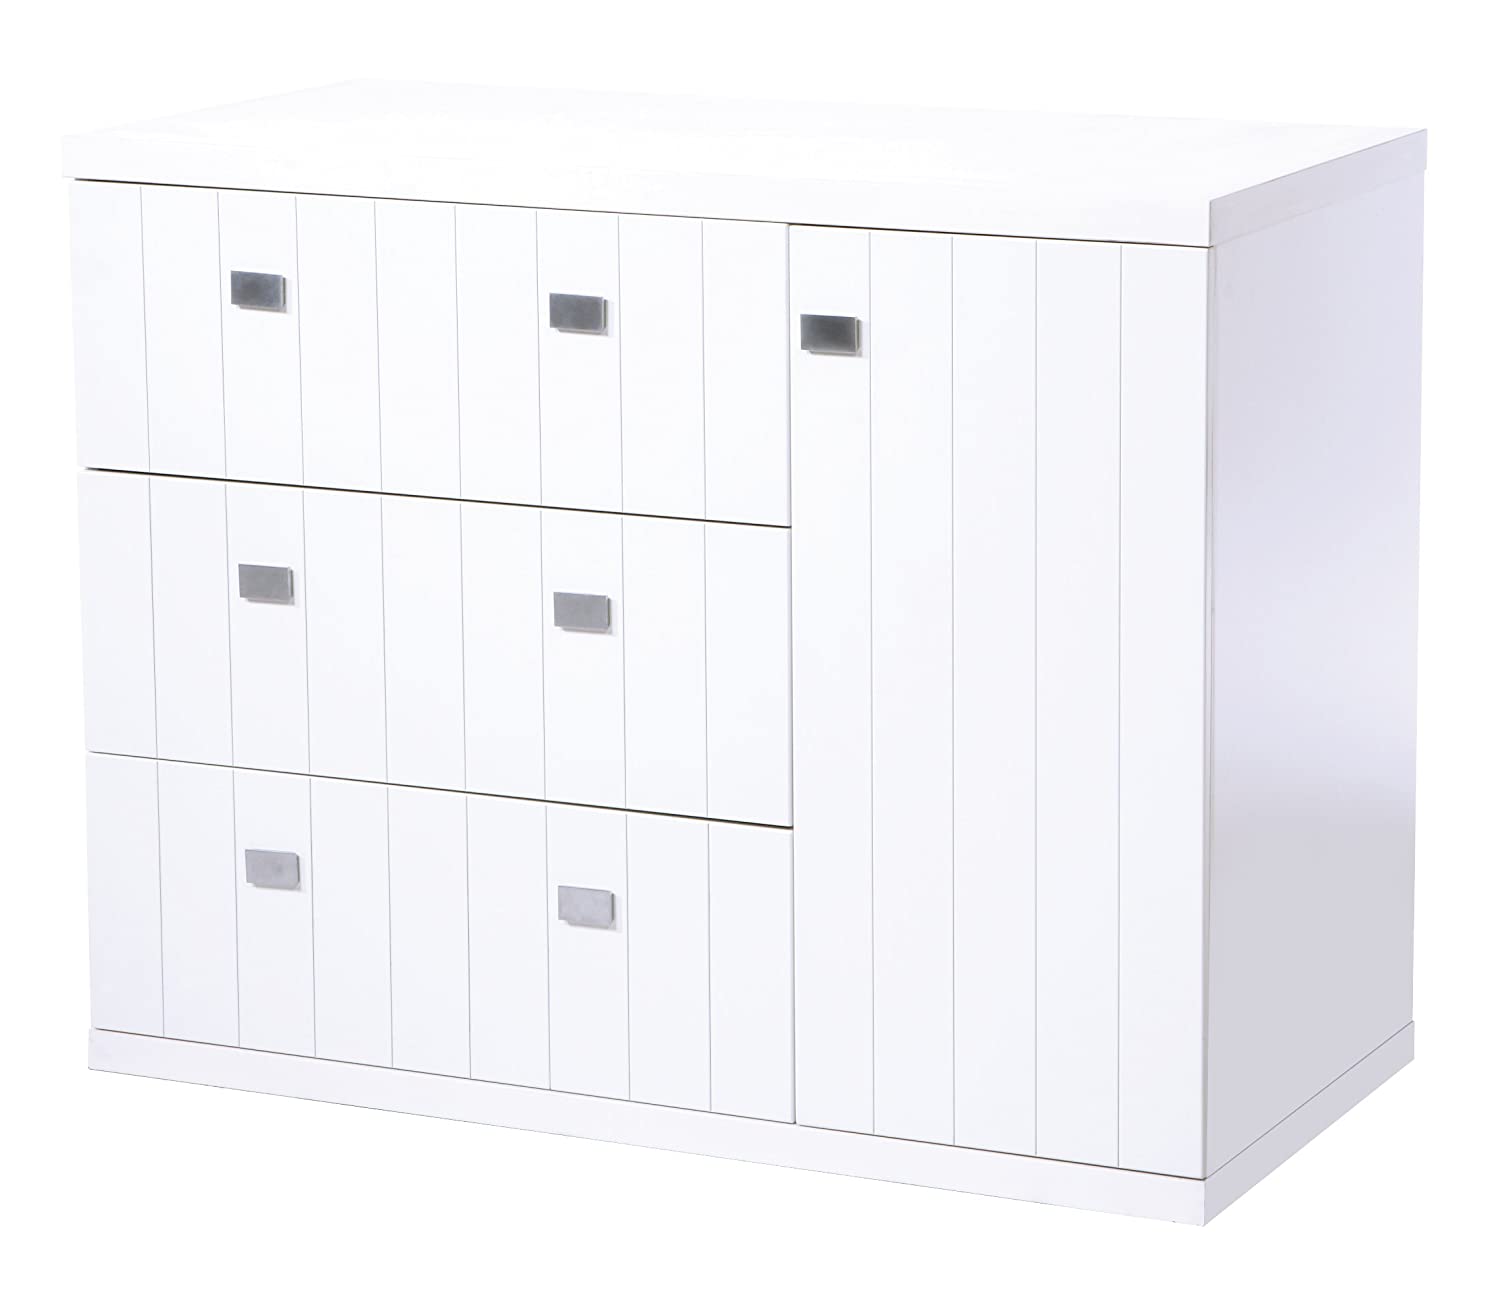 Roba Multistar 41461 Wardrobe Chest of Drawers